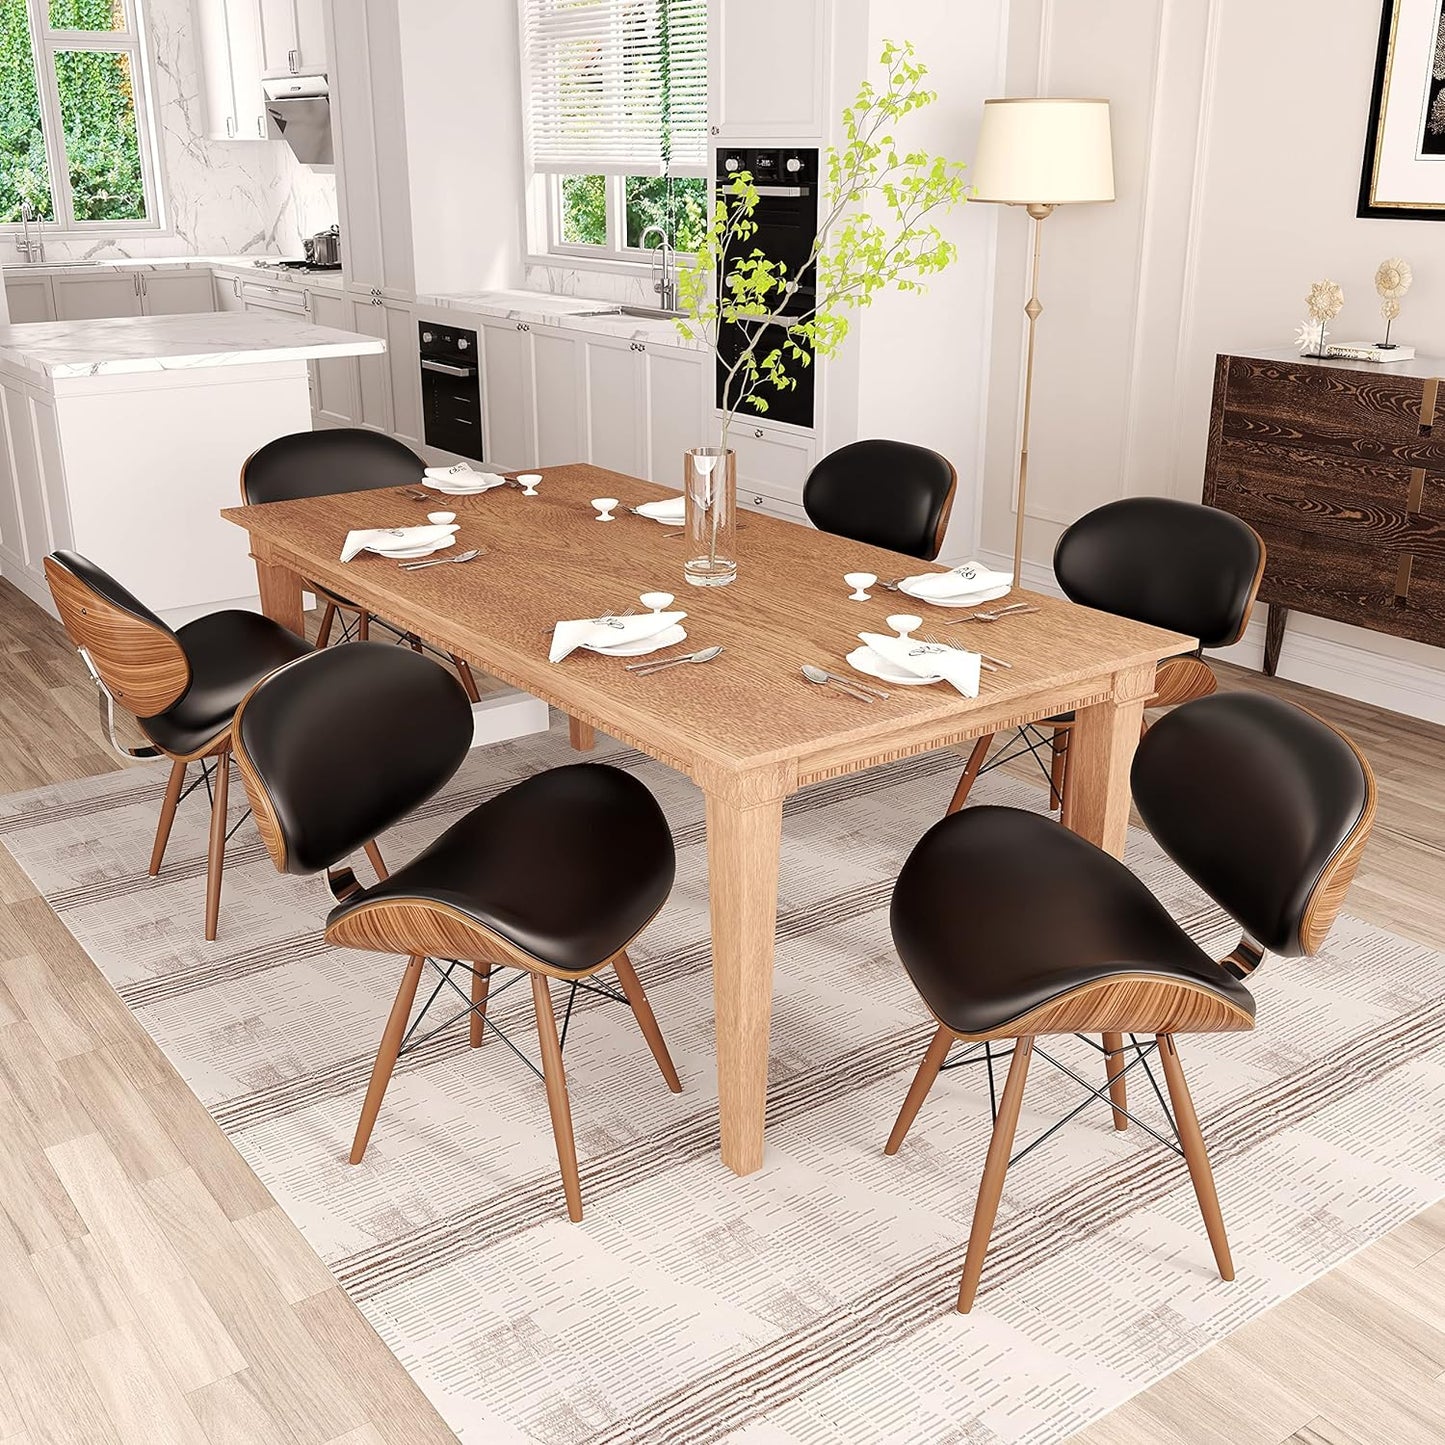 "Stylish Set of 4 Mid-Century Dining Chairs with Walnut Finish and Black Leather - Perfect for Modern Kitchens and Dining Rooms (Table Not Included)"